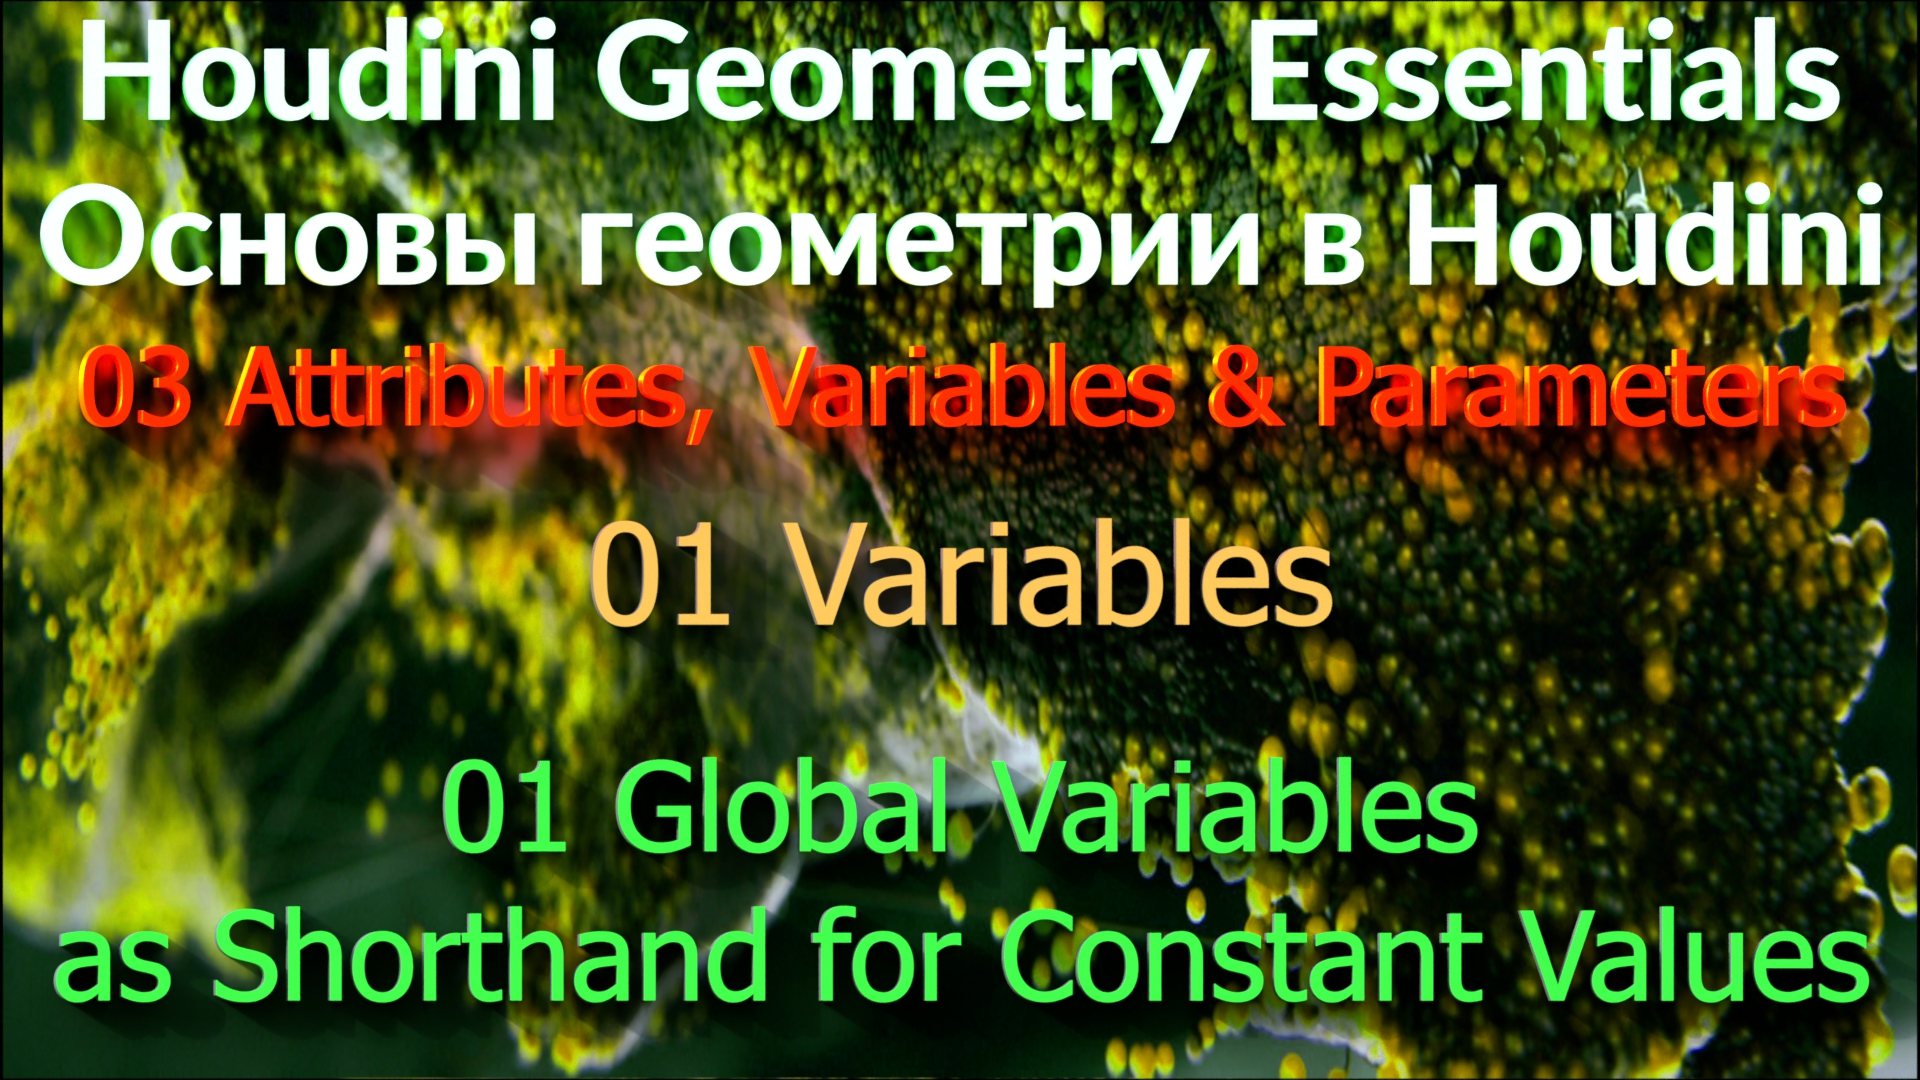 03_01_01 Global Variables as Shorthand for Constant Values